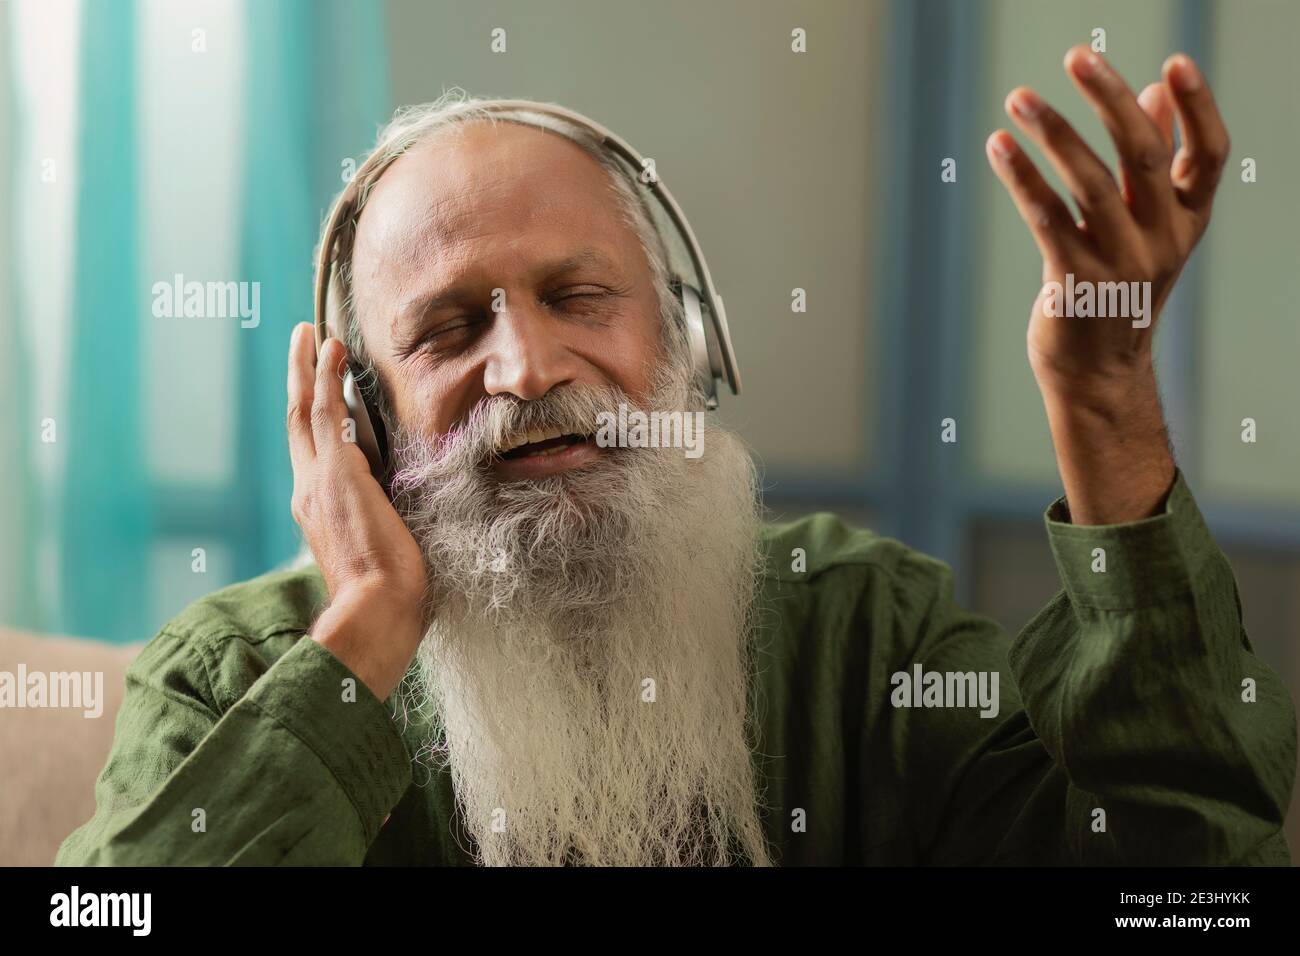 A HAPPY OLD MAN SINGING ALONG WHILE LISTENING TO MUSIC Stock Photo